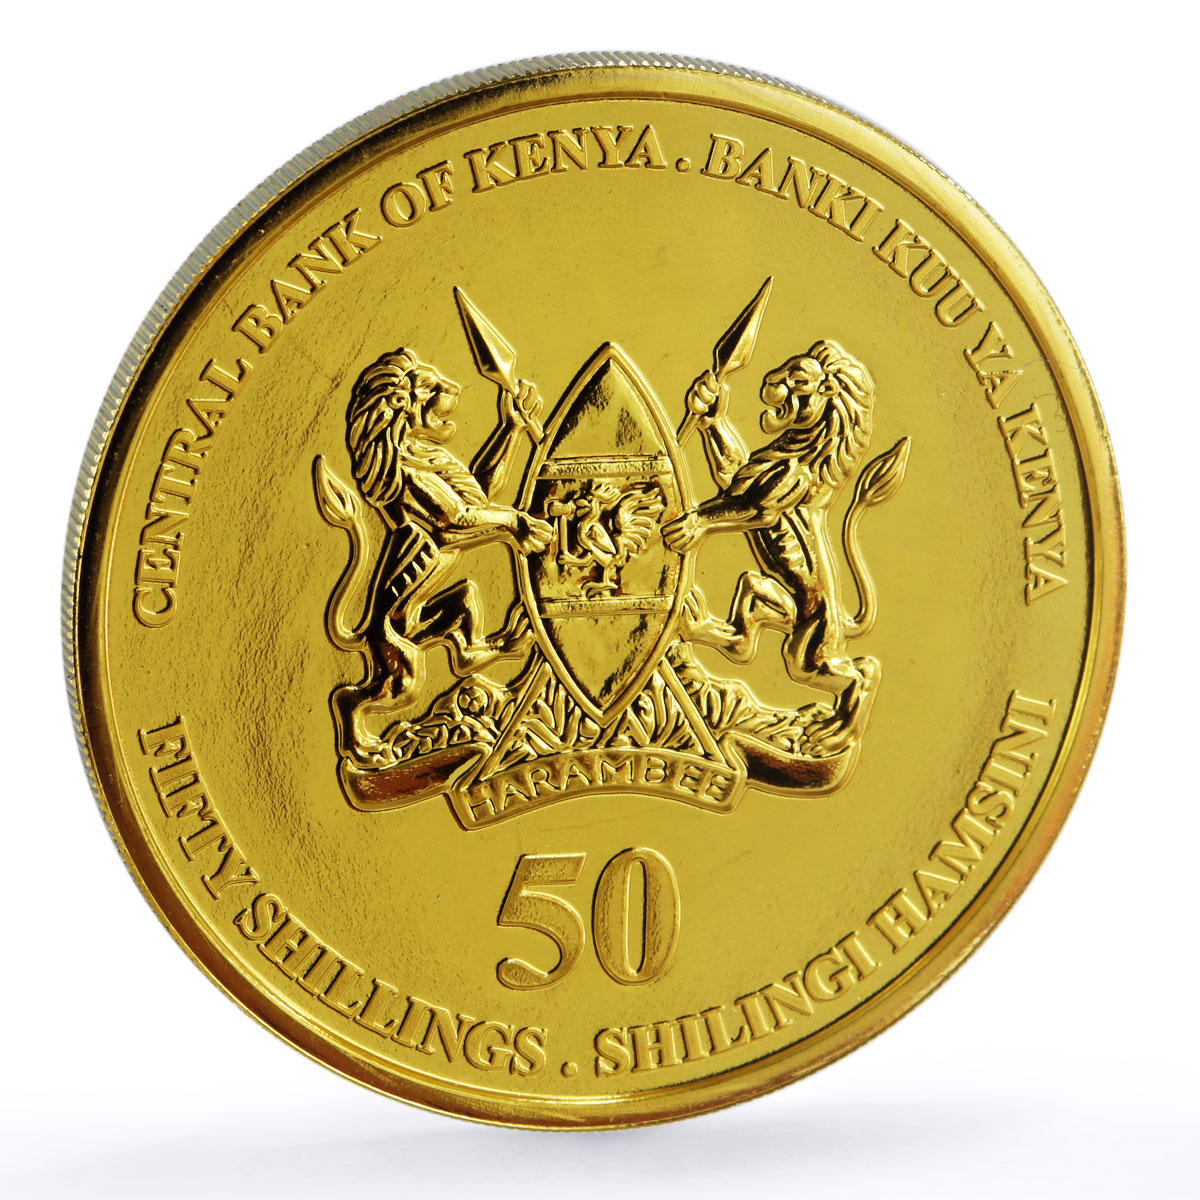 Kenya 50 shillings 50th Anniversary of Central Bank gilded NiBrass coin 2016